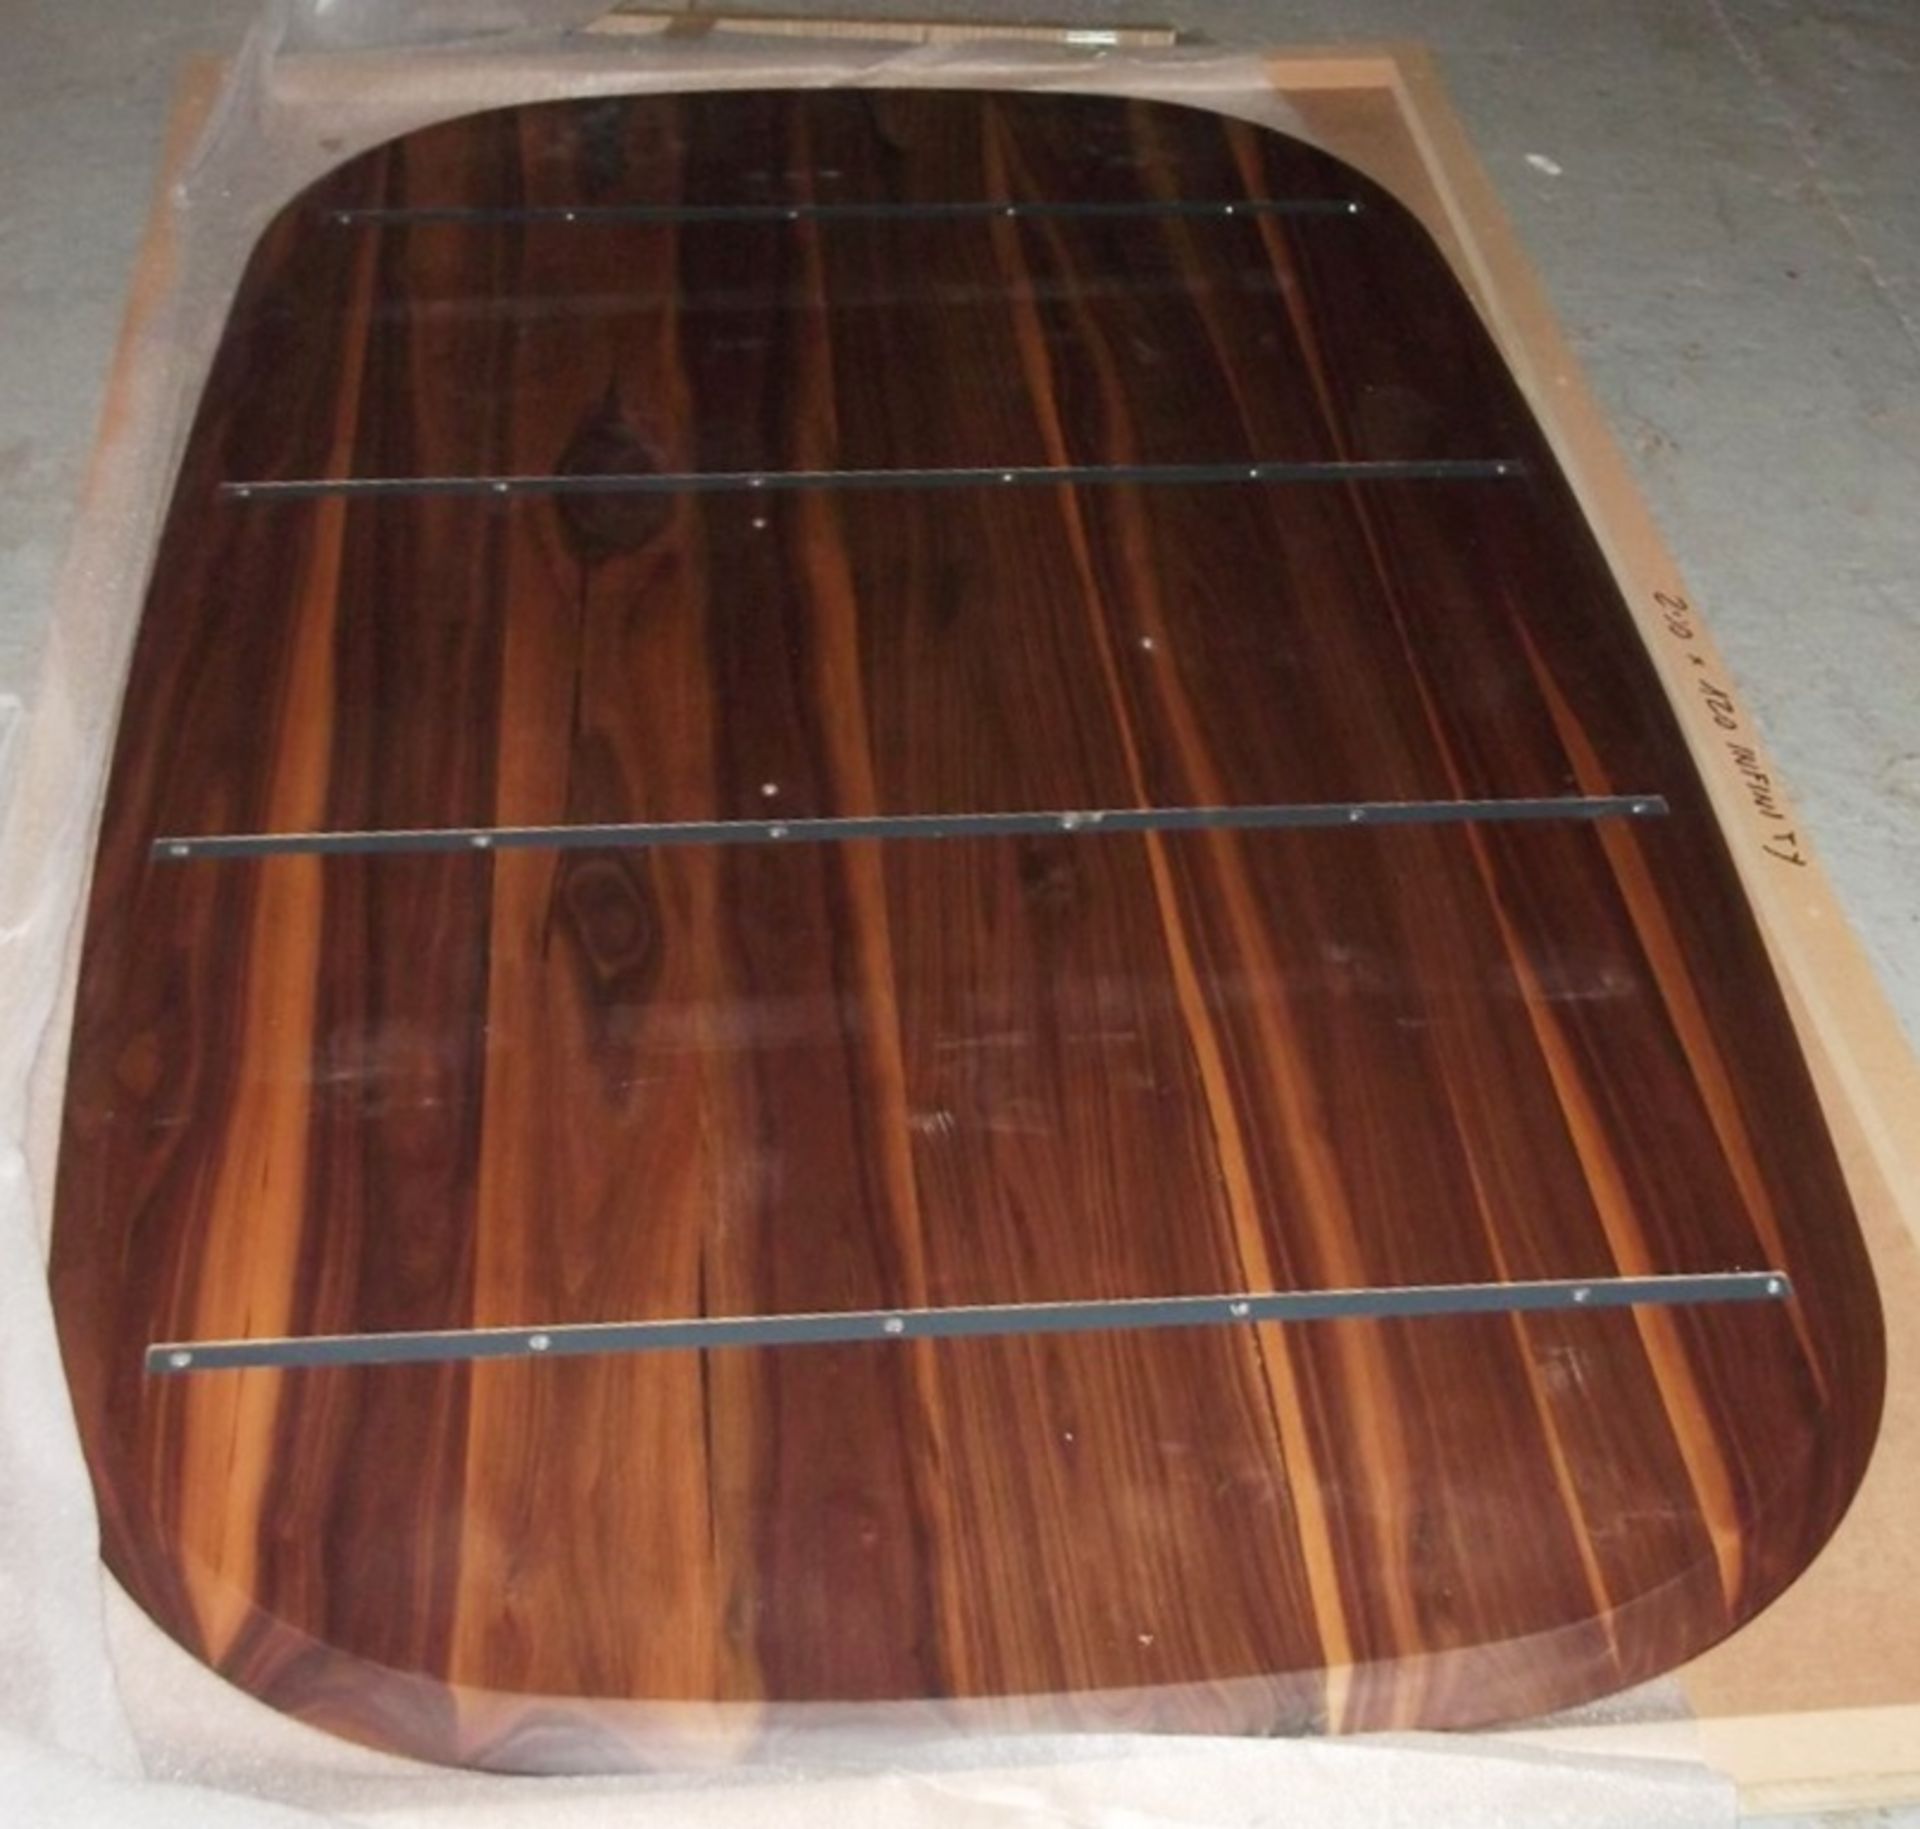 1 x PORADA Infinity (Oval Wooden Table Top Only) - Dimensions (Approx): 240 x 120cm - Solid - Image 3 of 3